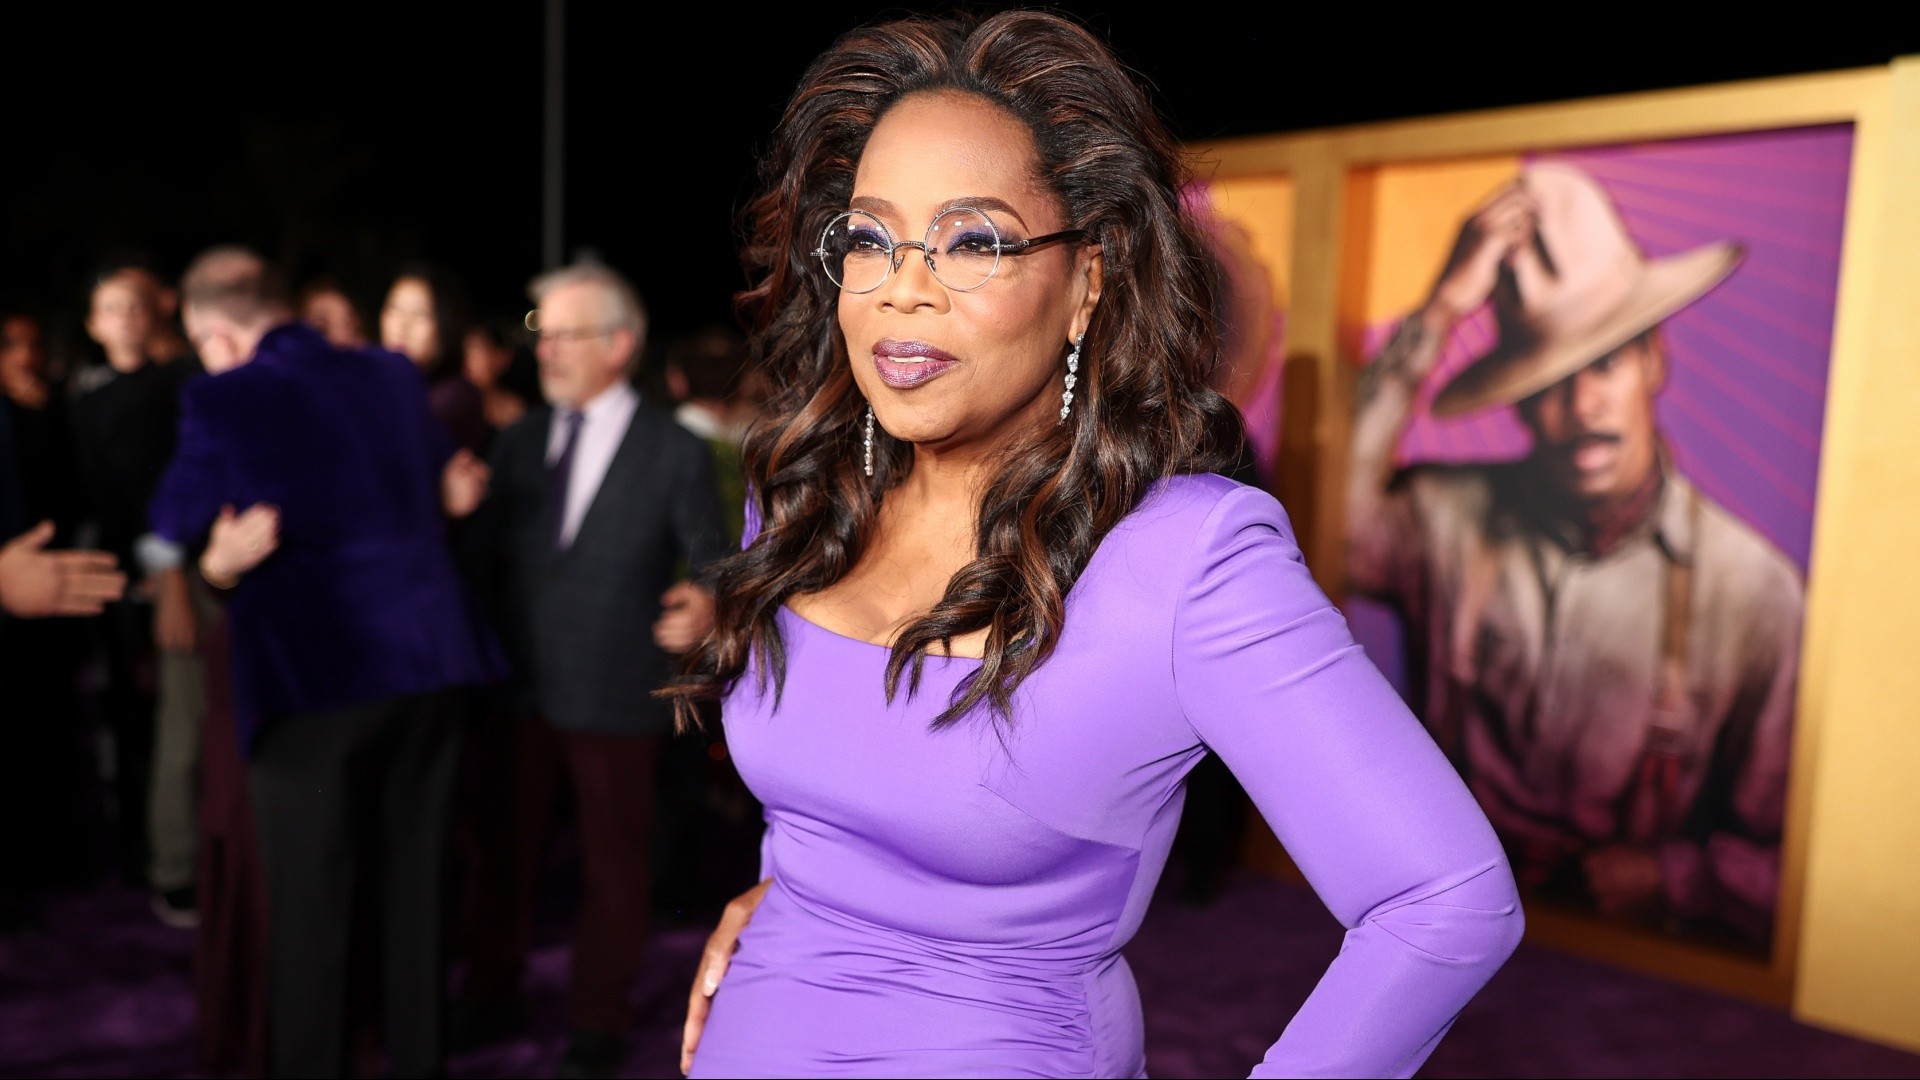 Oprah Winfrey reveals she uses weight-loss drugs, calls it a 'gift'